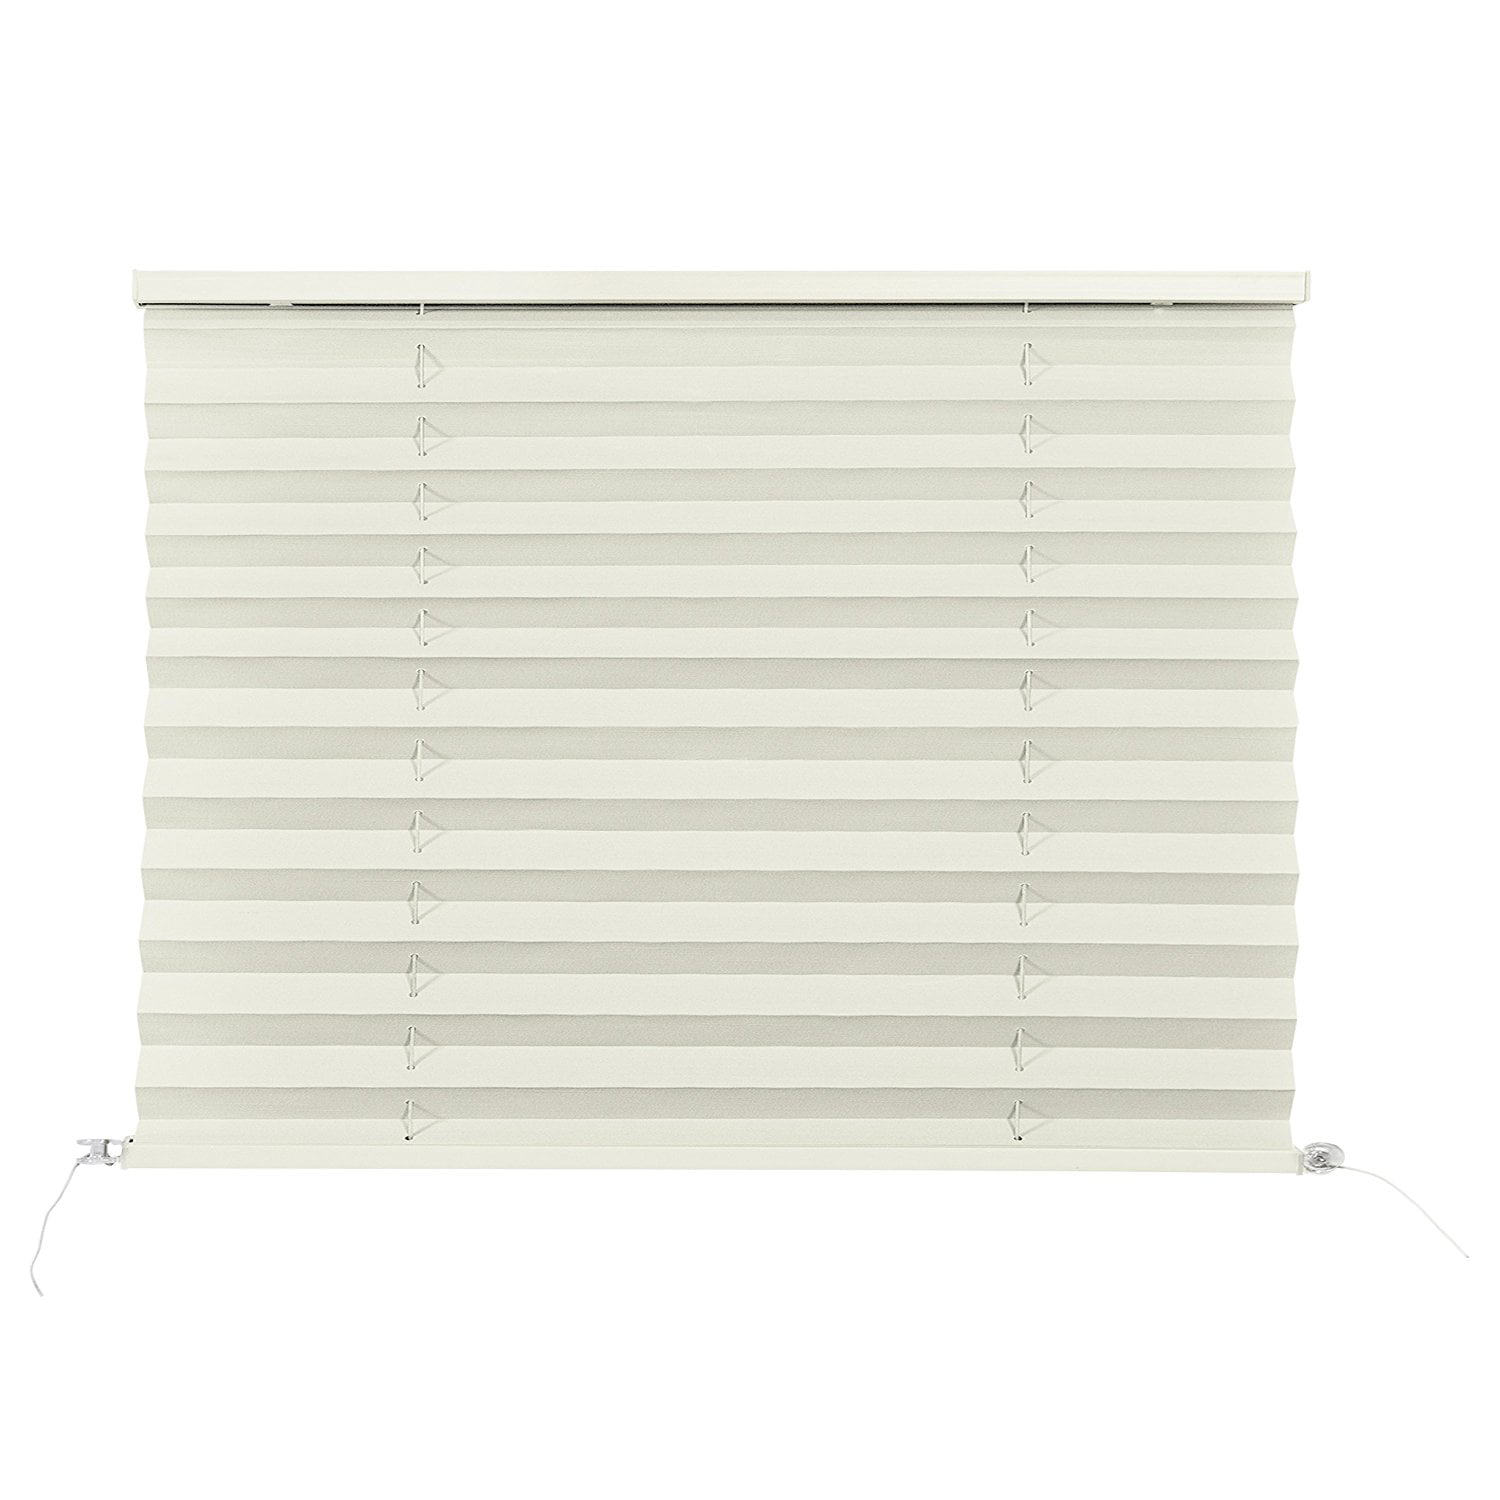 Details about   Camper Comfort Cappuccino RV Pleated ShadeCamper BlindsRV Privacy Blinds 